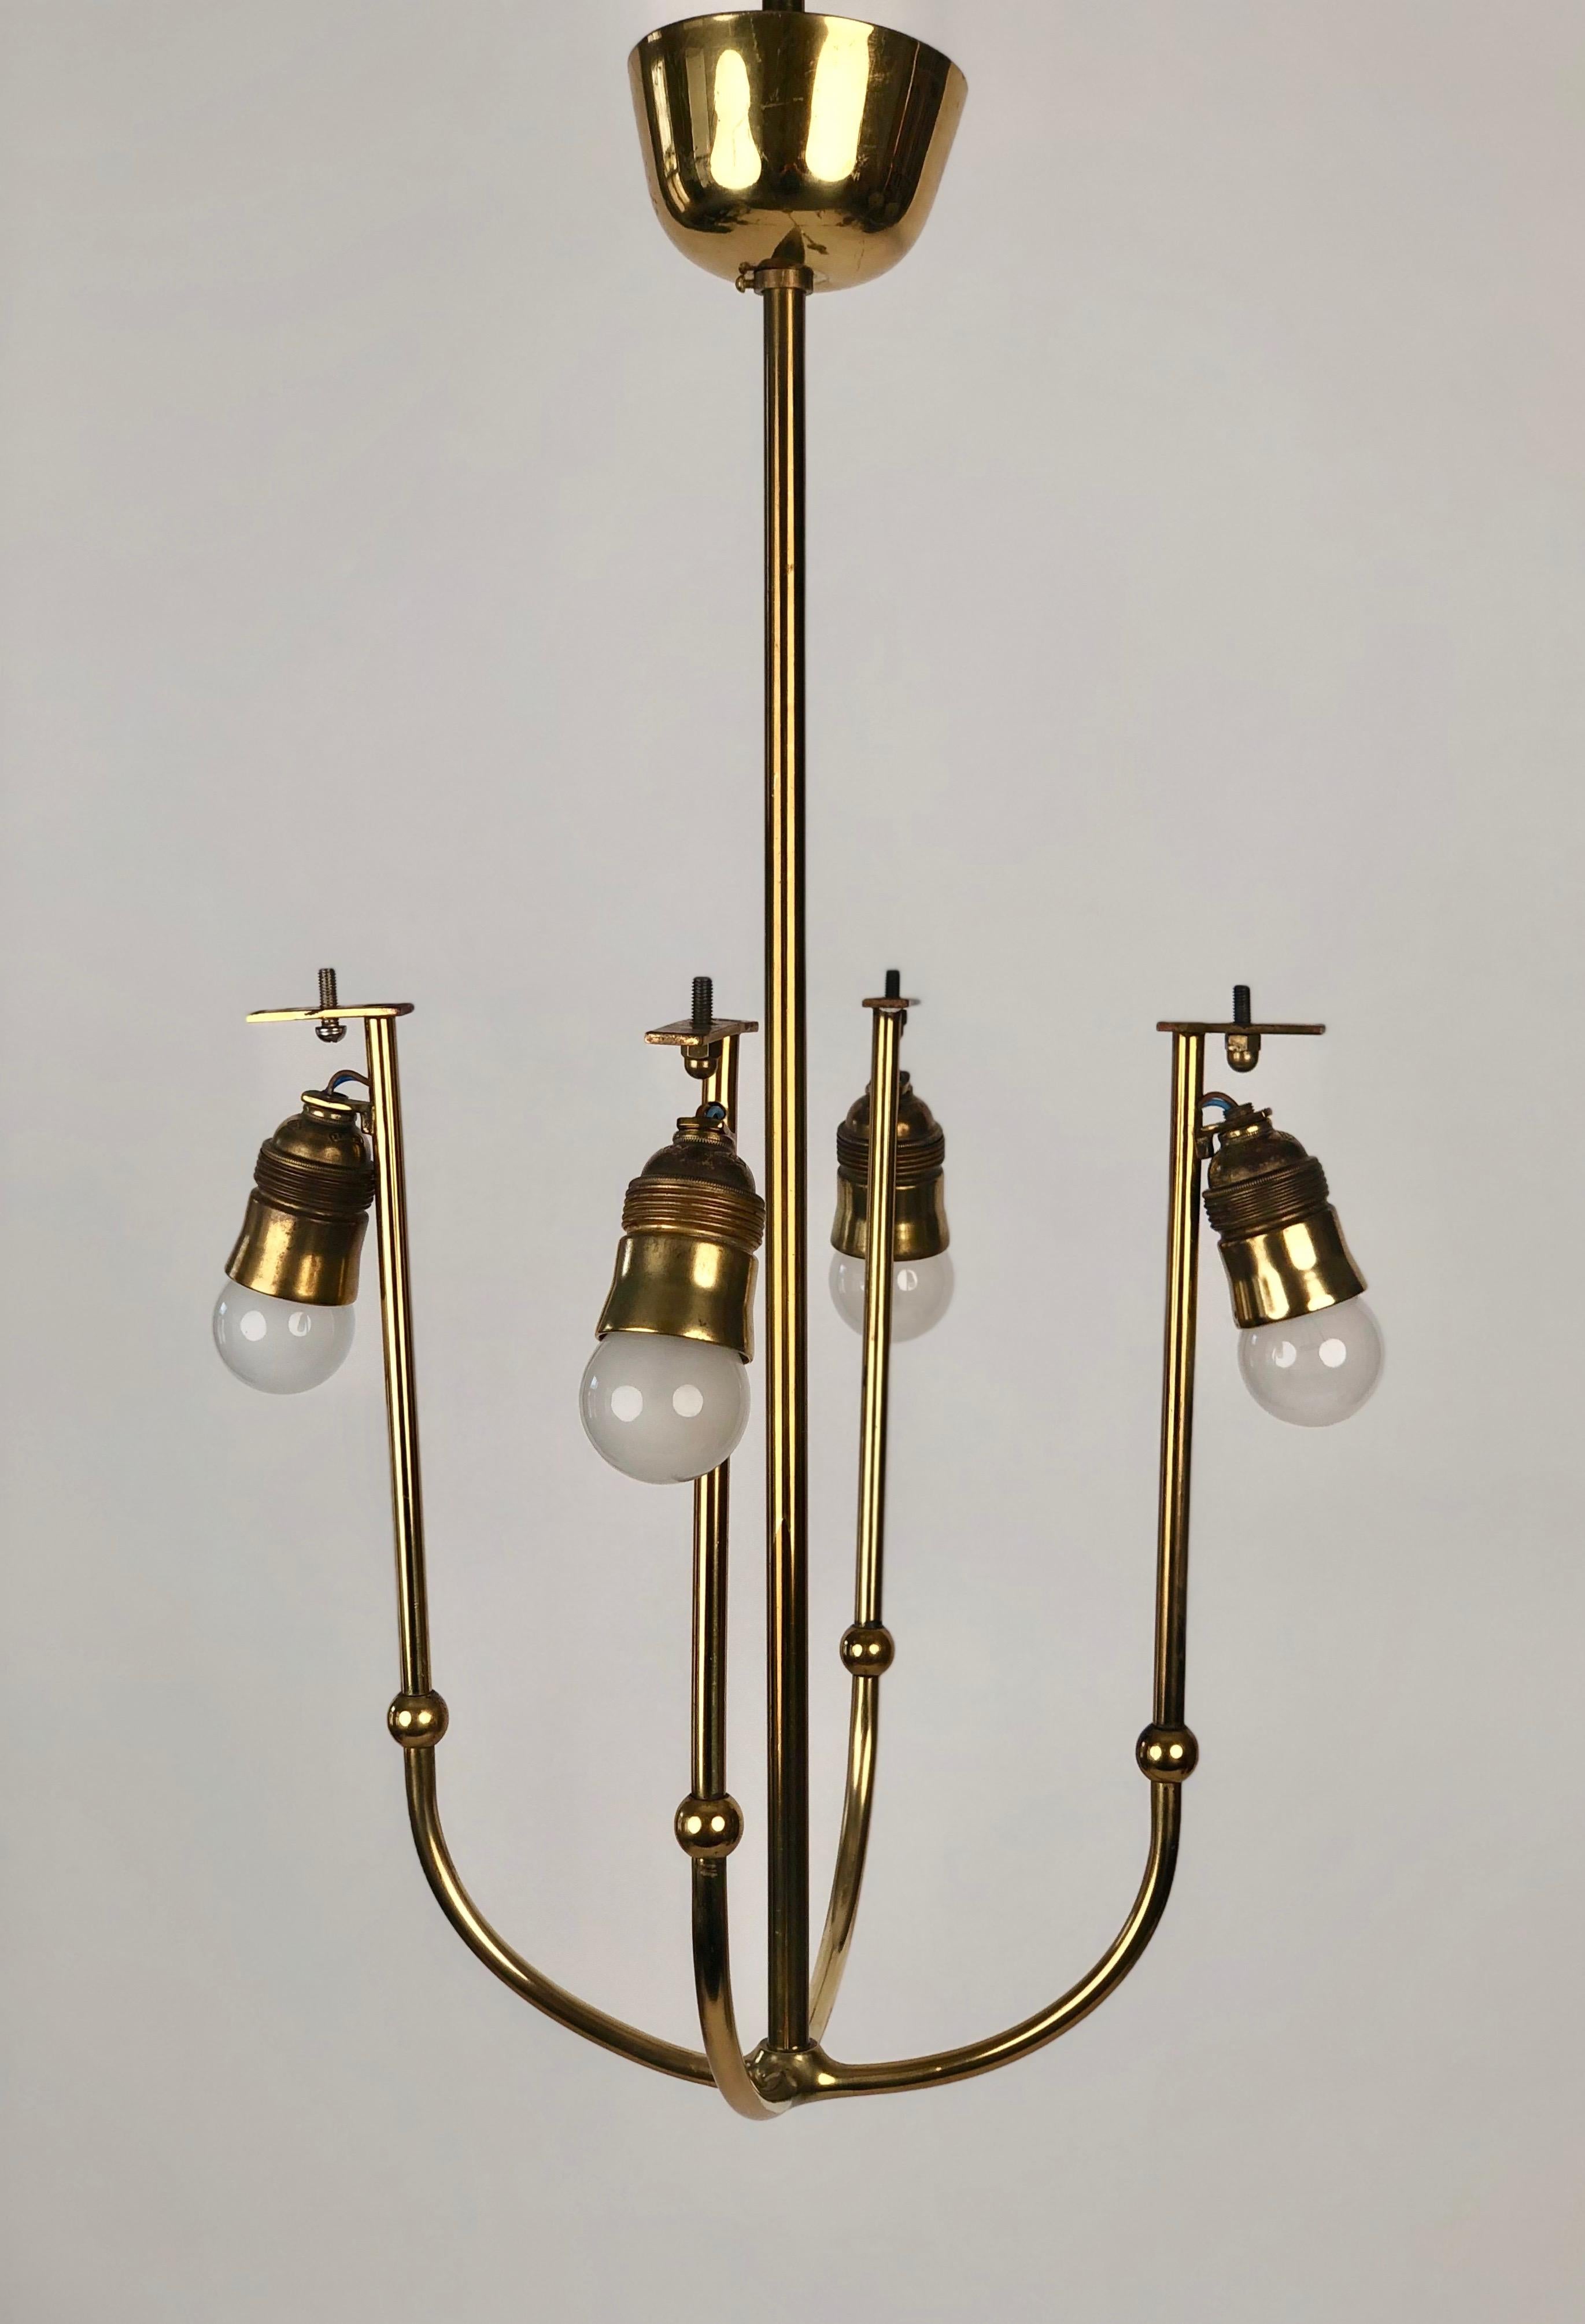 Four Arm Chandelier in Brass with Silk Shades , 1930's, Austria For Sale 9